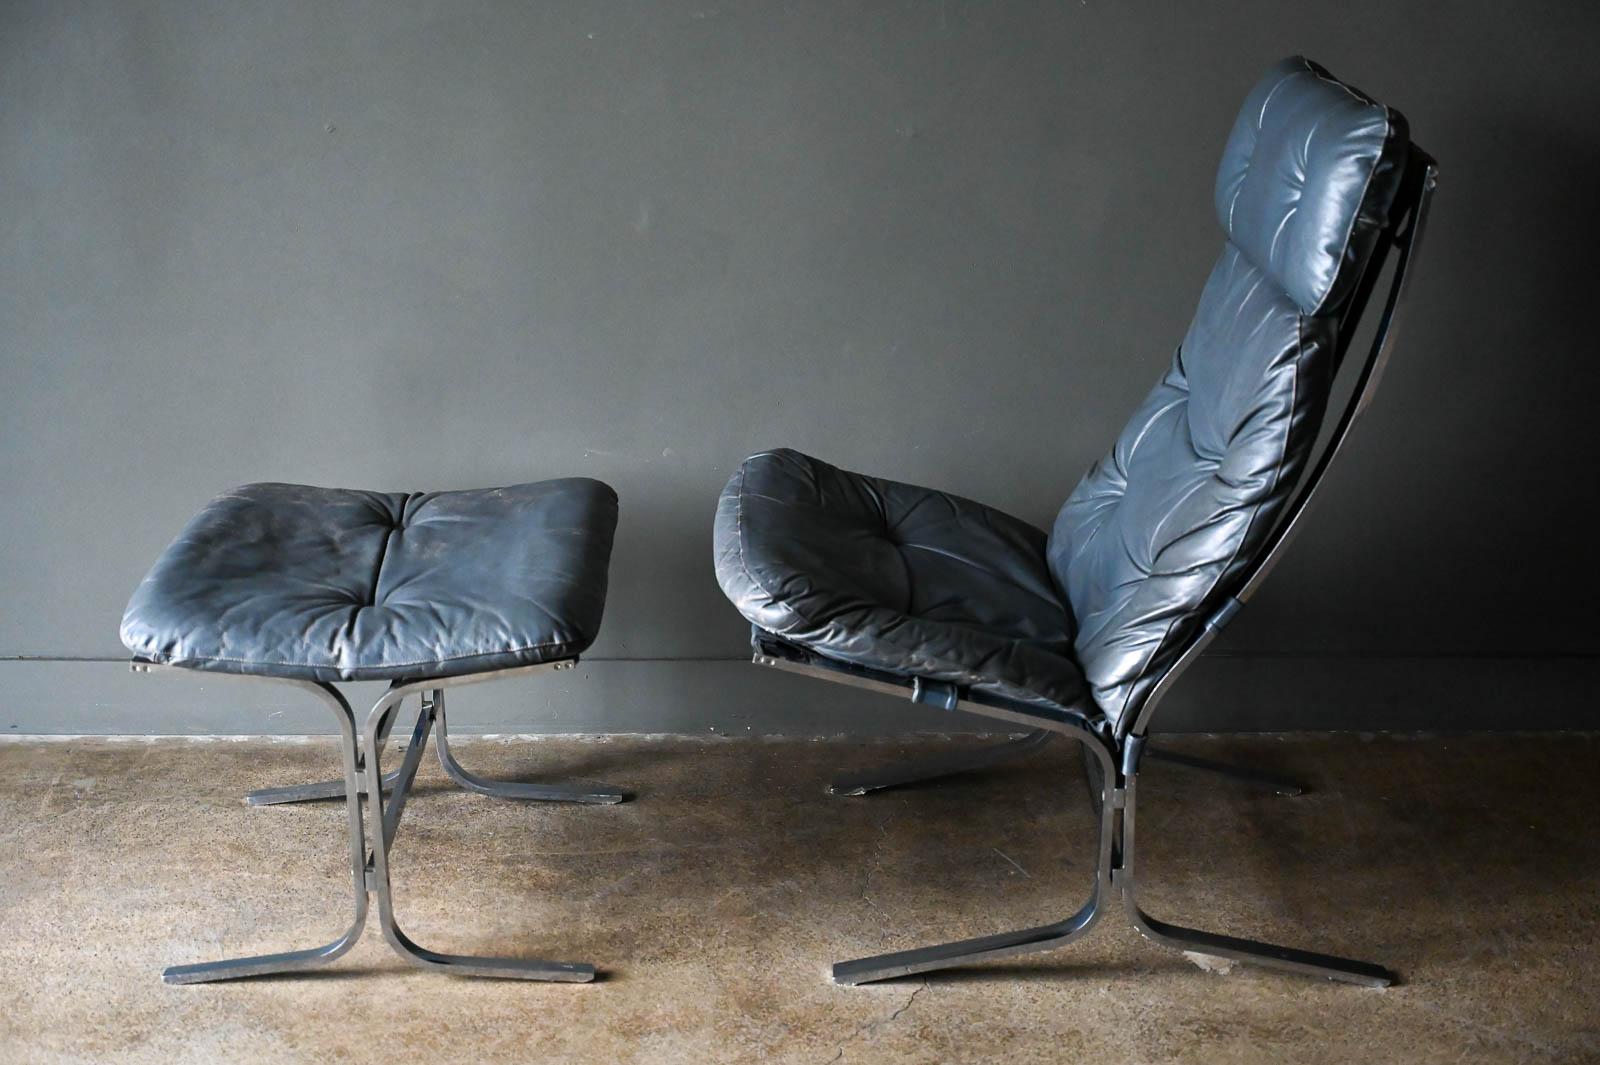 Steel Frame Siesta Chair in Grey Leather, circa 1970. Beautiful steel framed high back grey leather lounge chair with matching ottoman. Beautiful leather in good condition with heavy chromed steel frame. Overall 8/10 condition.